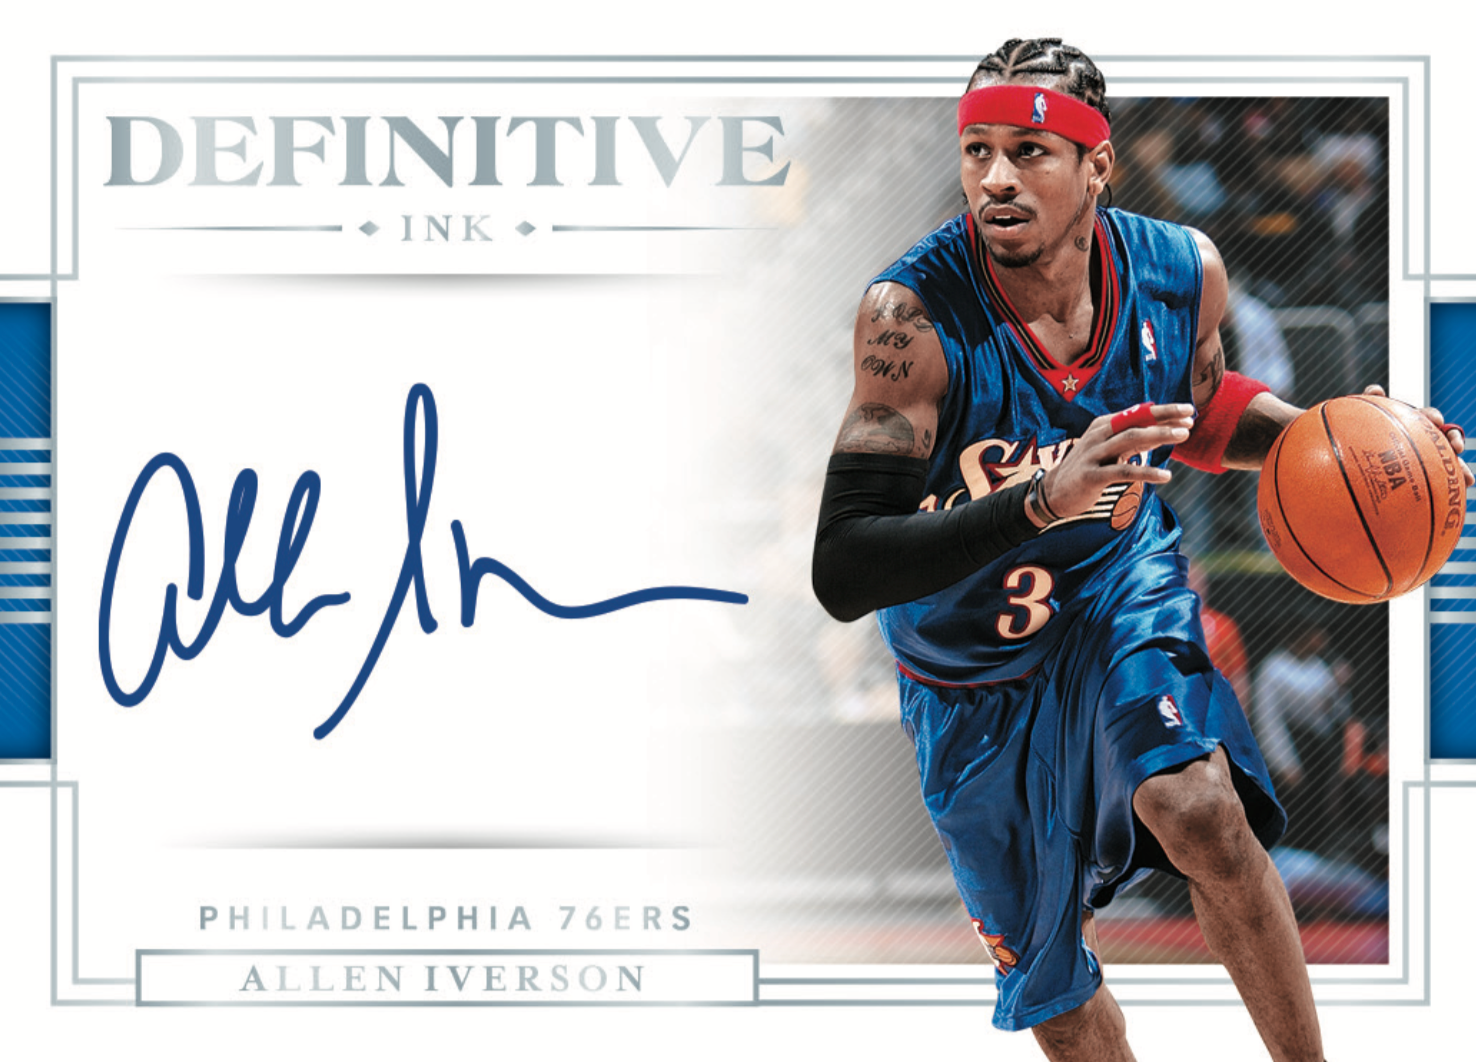 Panini 2019-20 National Treasures Basketball Gets A First Look!